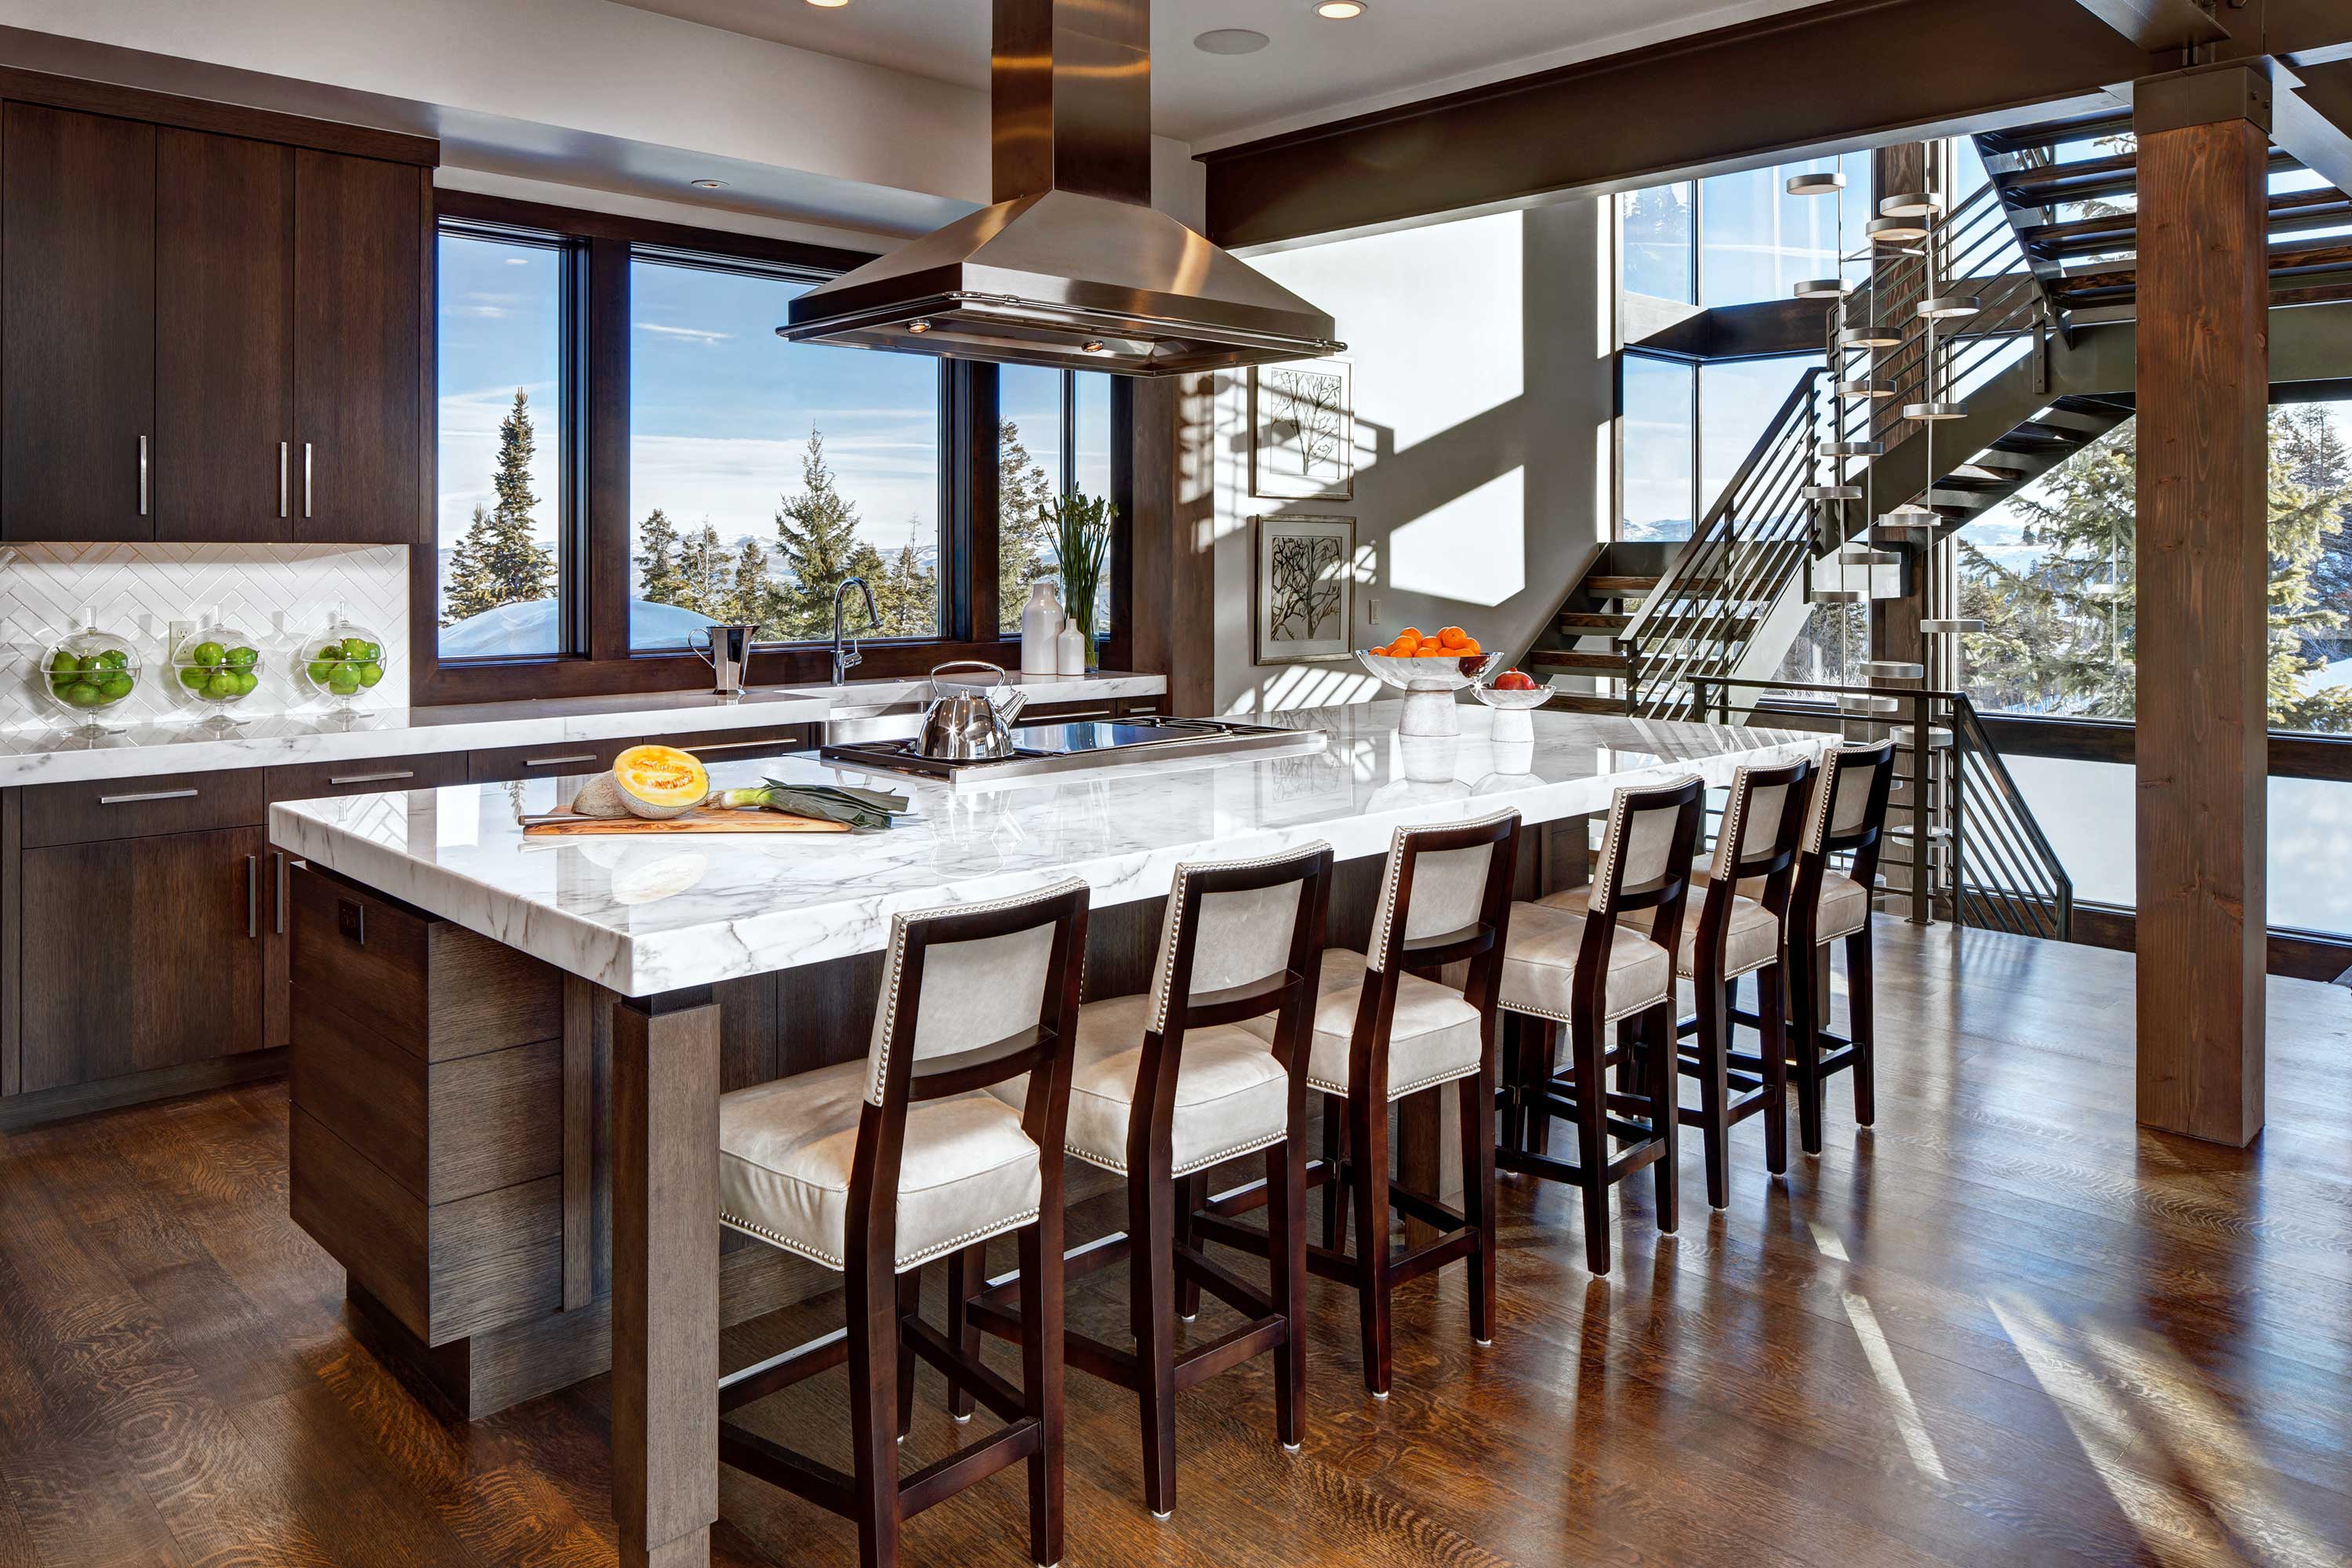 Stein Eriksen Residences project in Park City, Utah photographed by architecture photographer Alan Blakely.